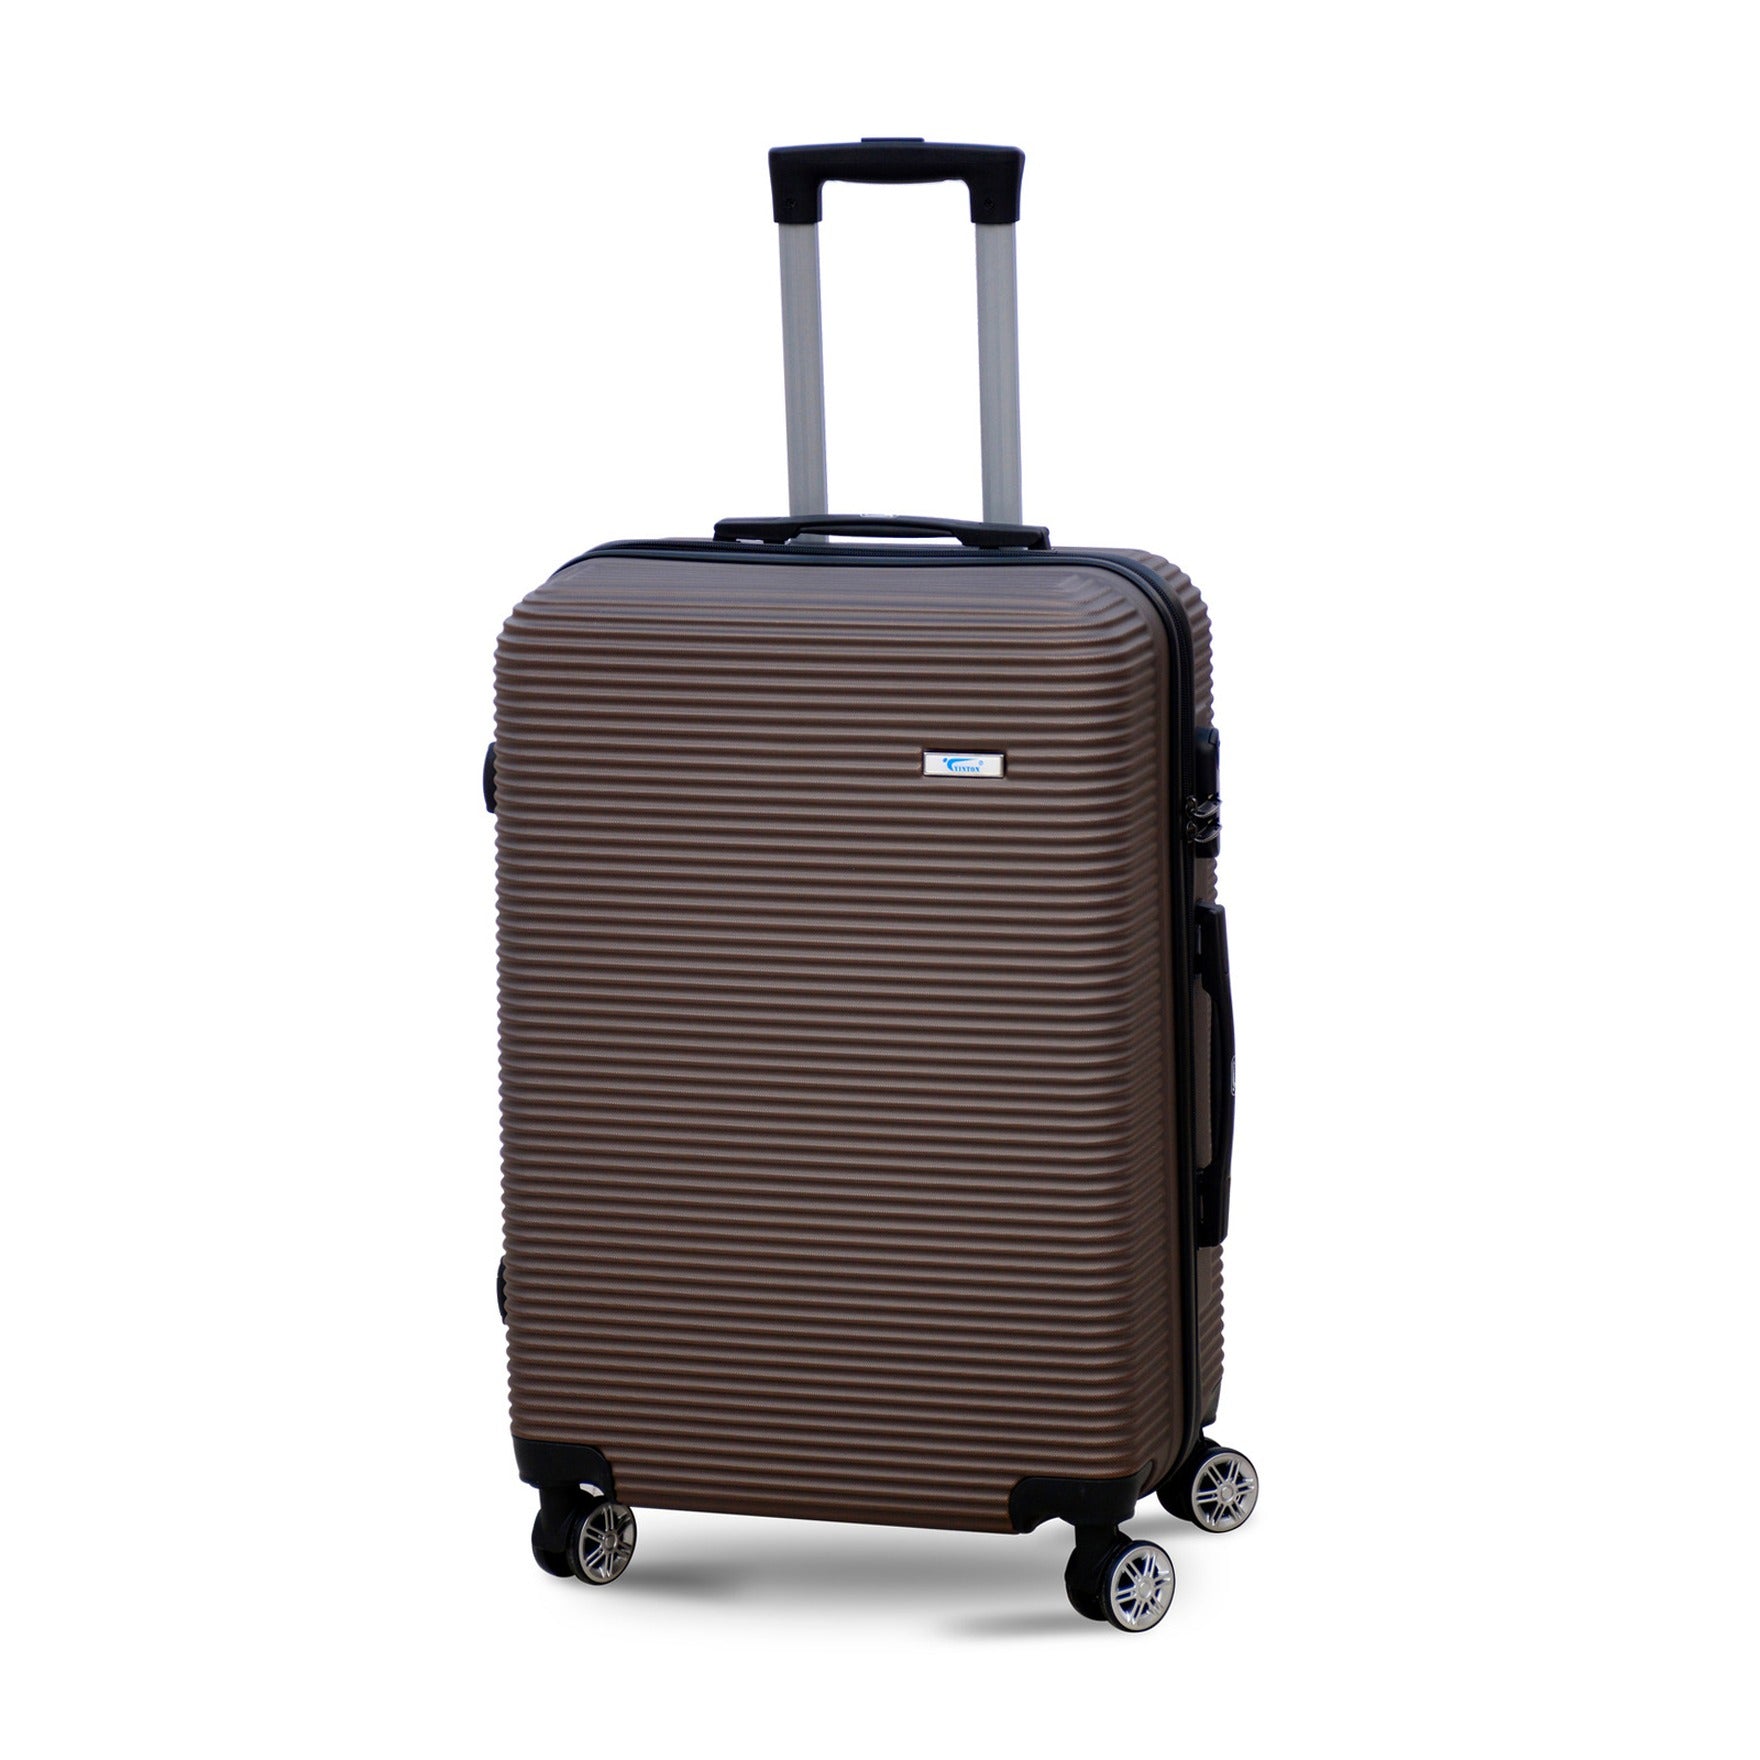 20" Coffee Colour JIAN ABS Line Luggage Lightweight Hard Case Carry On Trolley Bag With Spinner Wheel